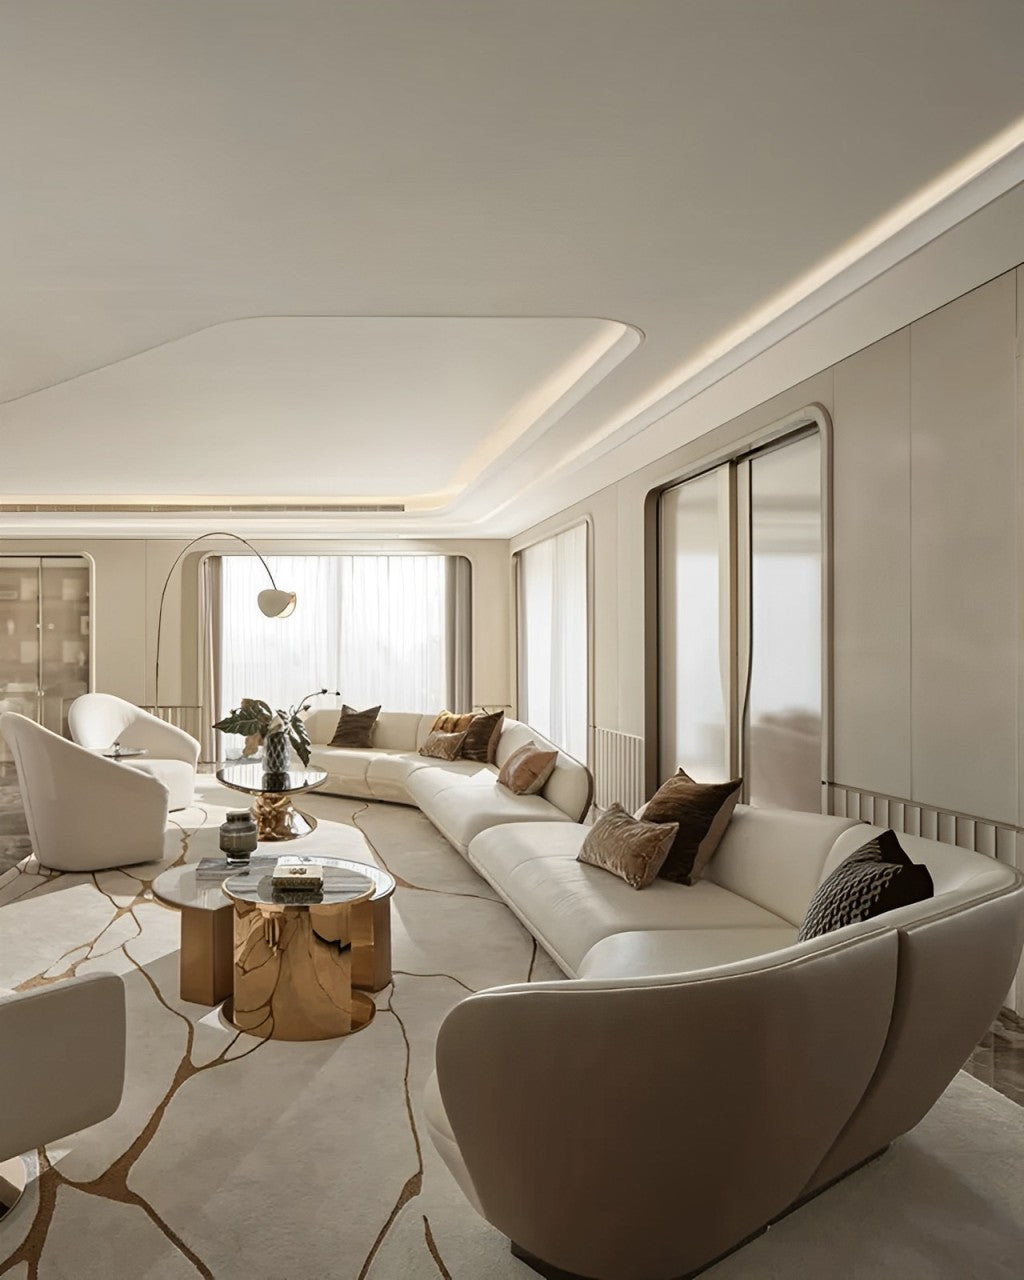 Discover Elegance: Beige Curved Sofa in Contemporary Decor